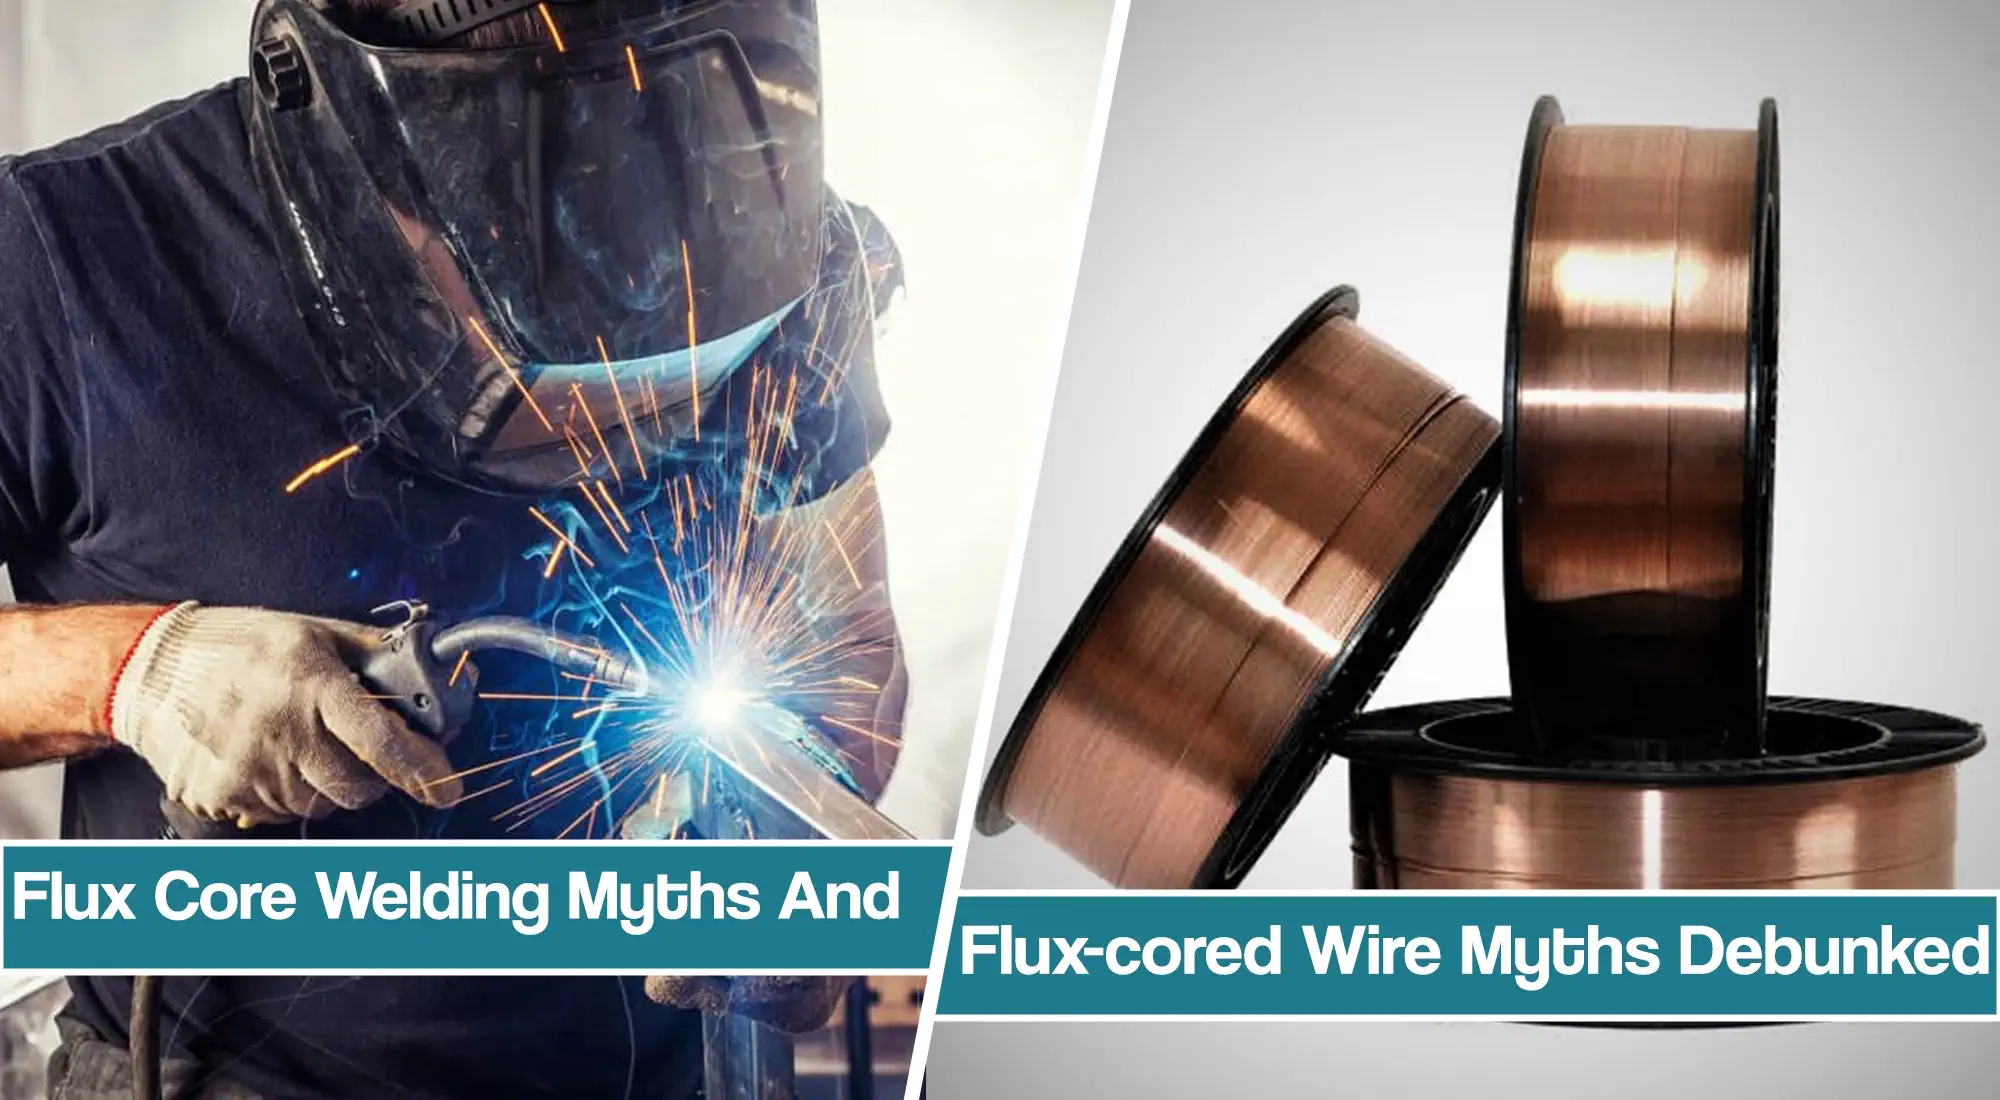 Common Flux-cored Wire Myths and Flux Core Welding Myths Debunked